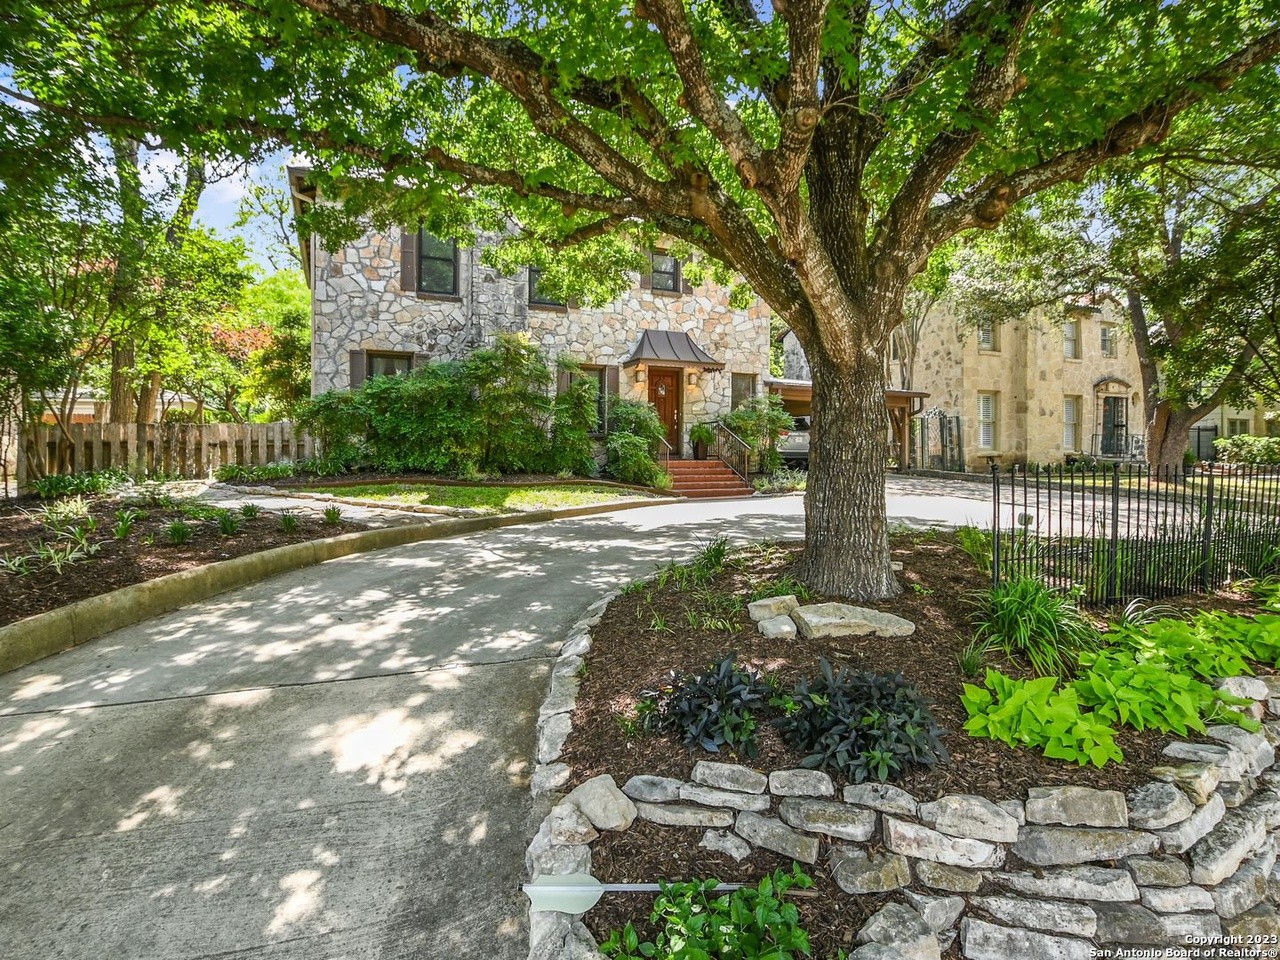 A 1938 stone home built by San Antonio real-estate mogul H.C. Thorman is now for sale